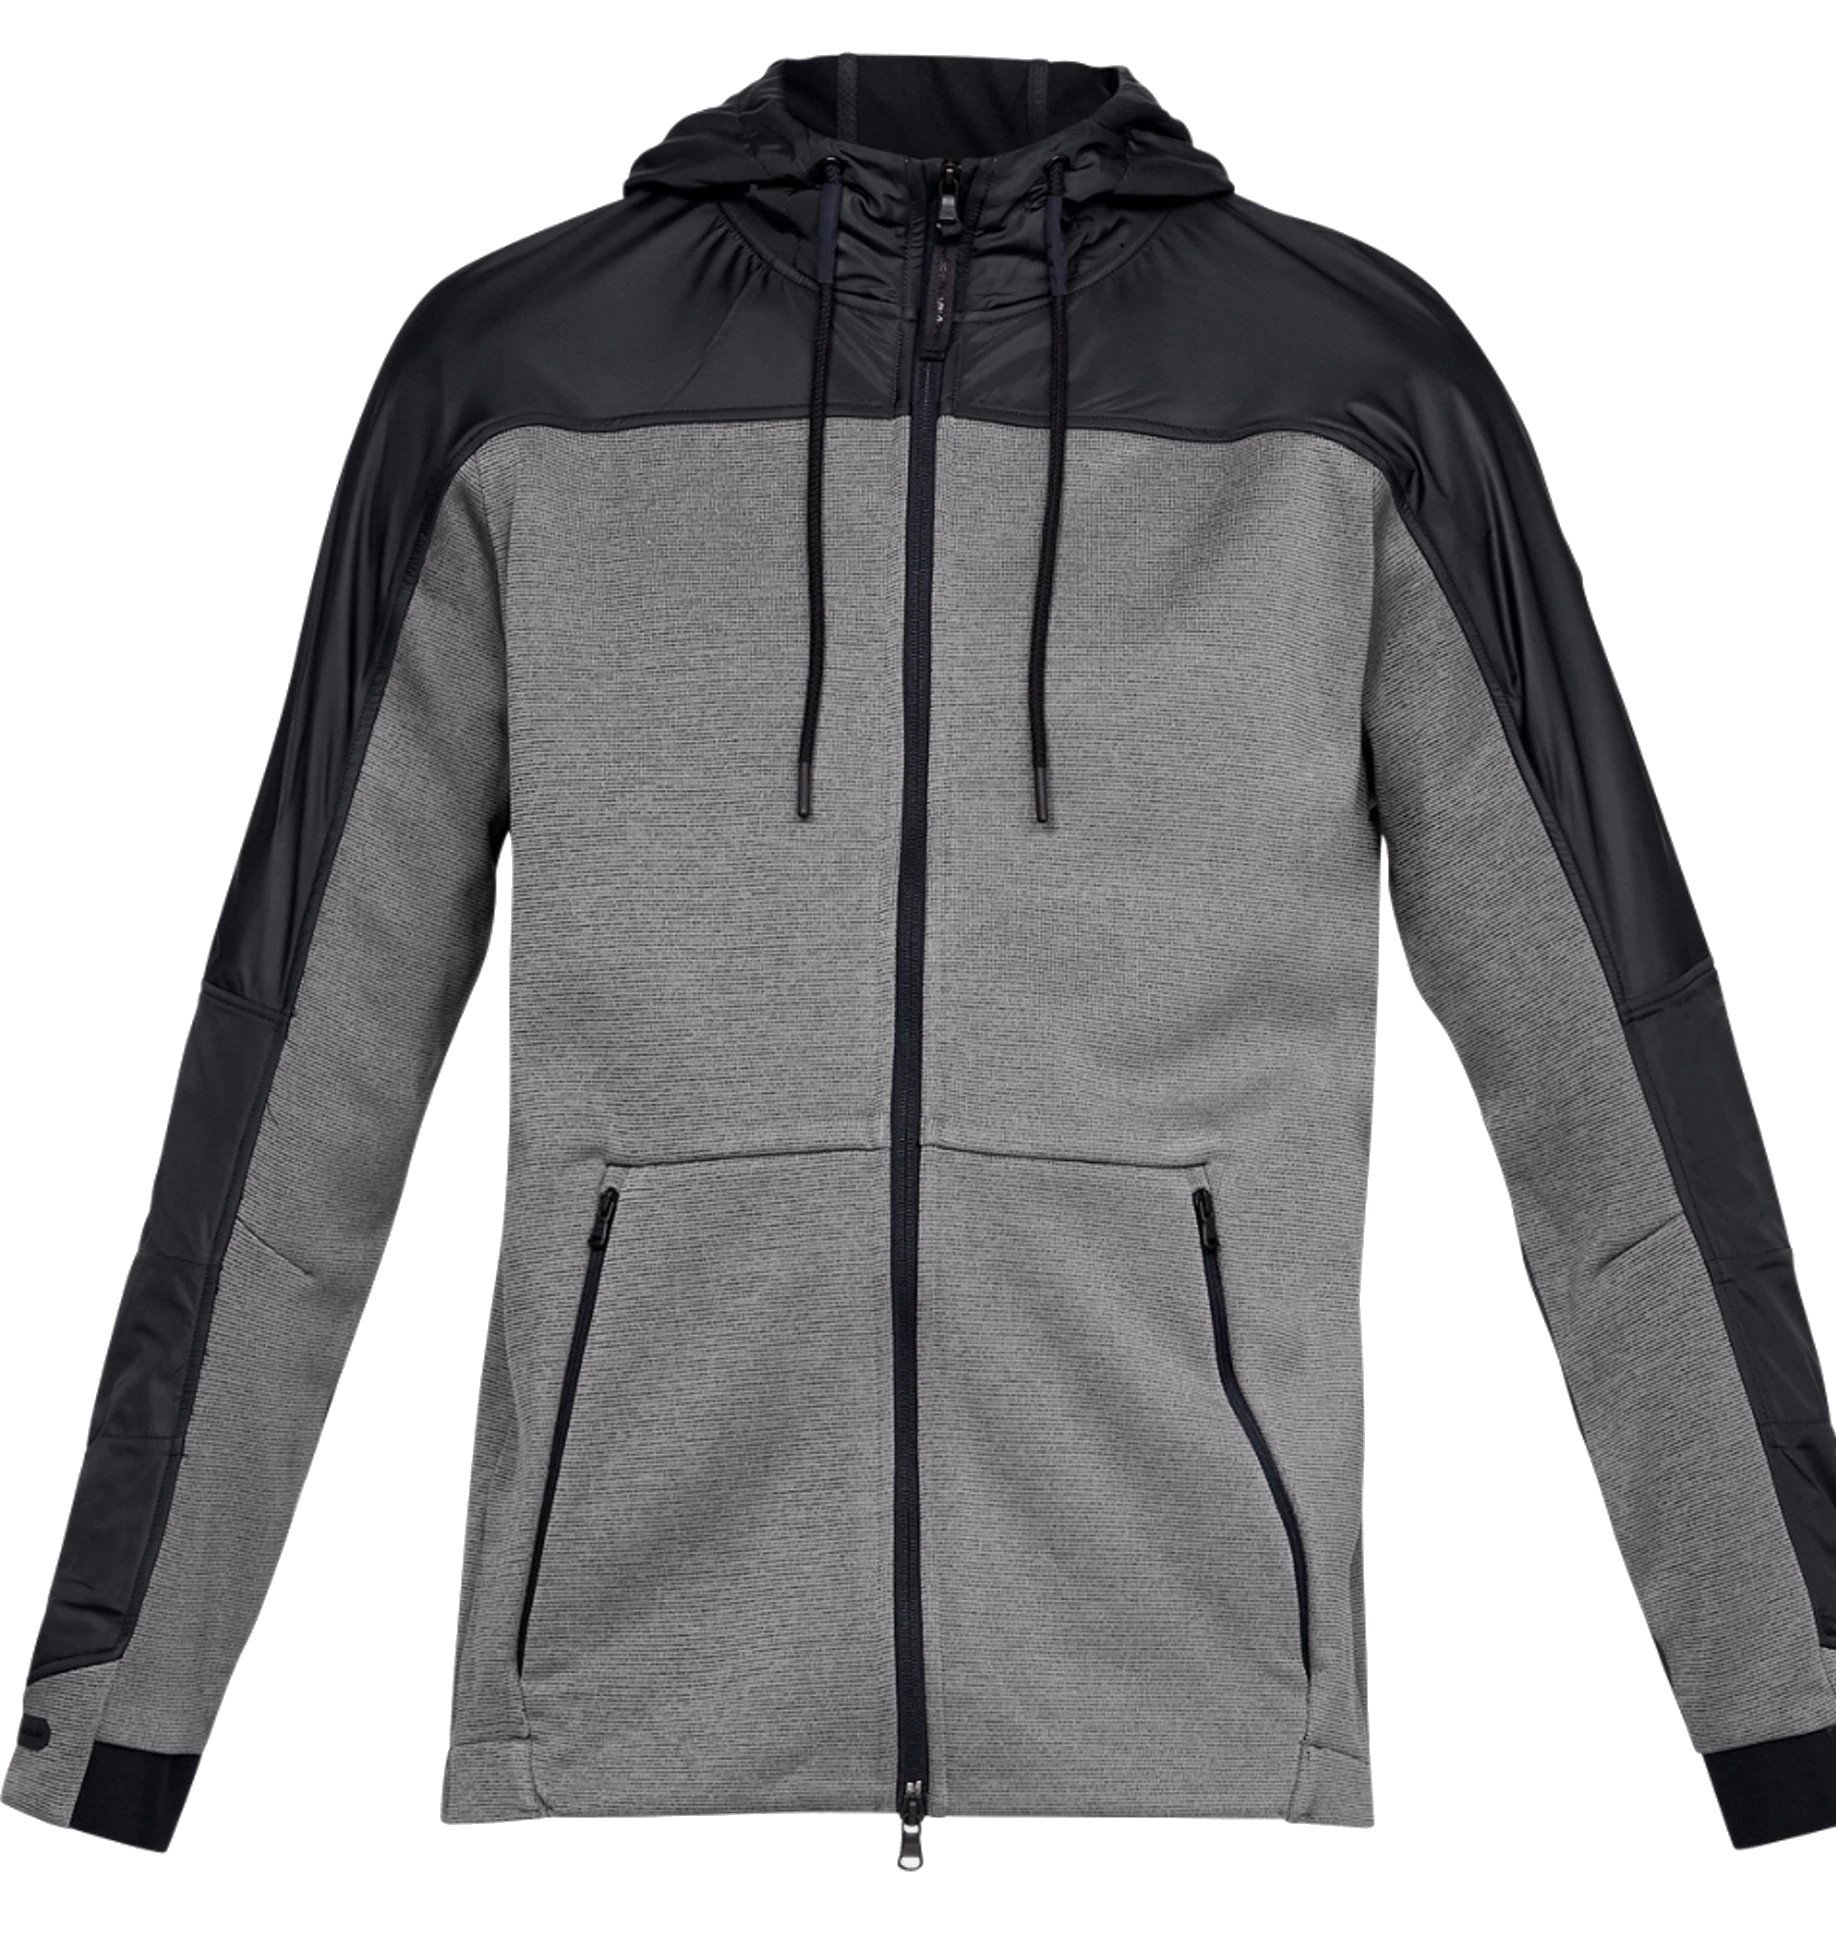 Hooded jacket Under Armour UNSTOPPABLE SWACKET - Top4Fitness.com